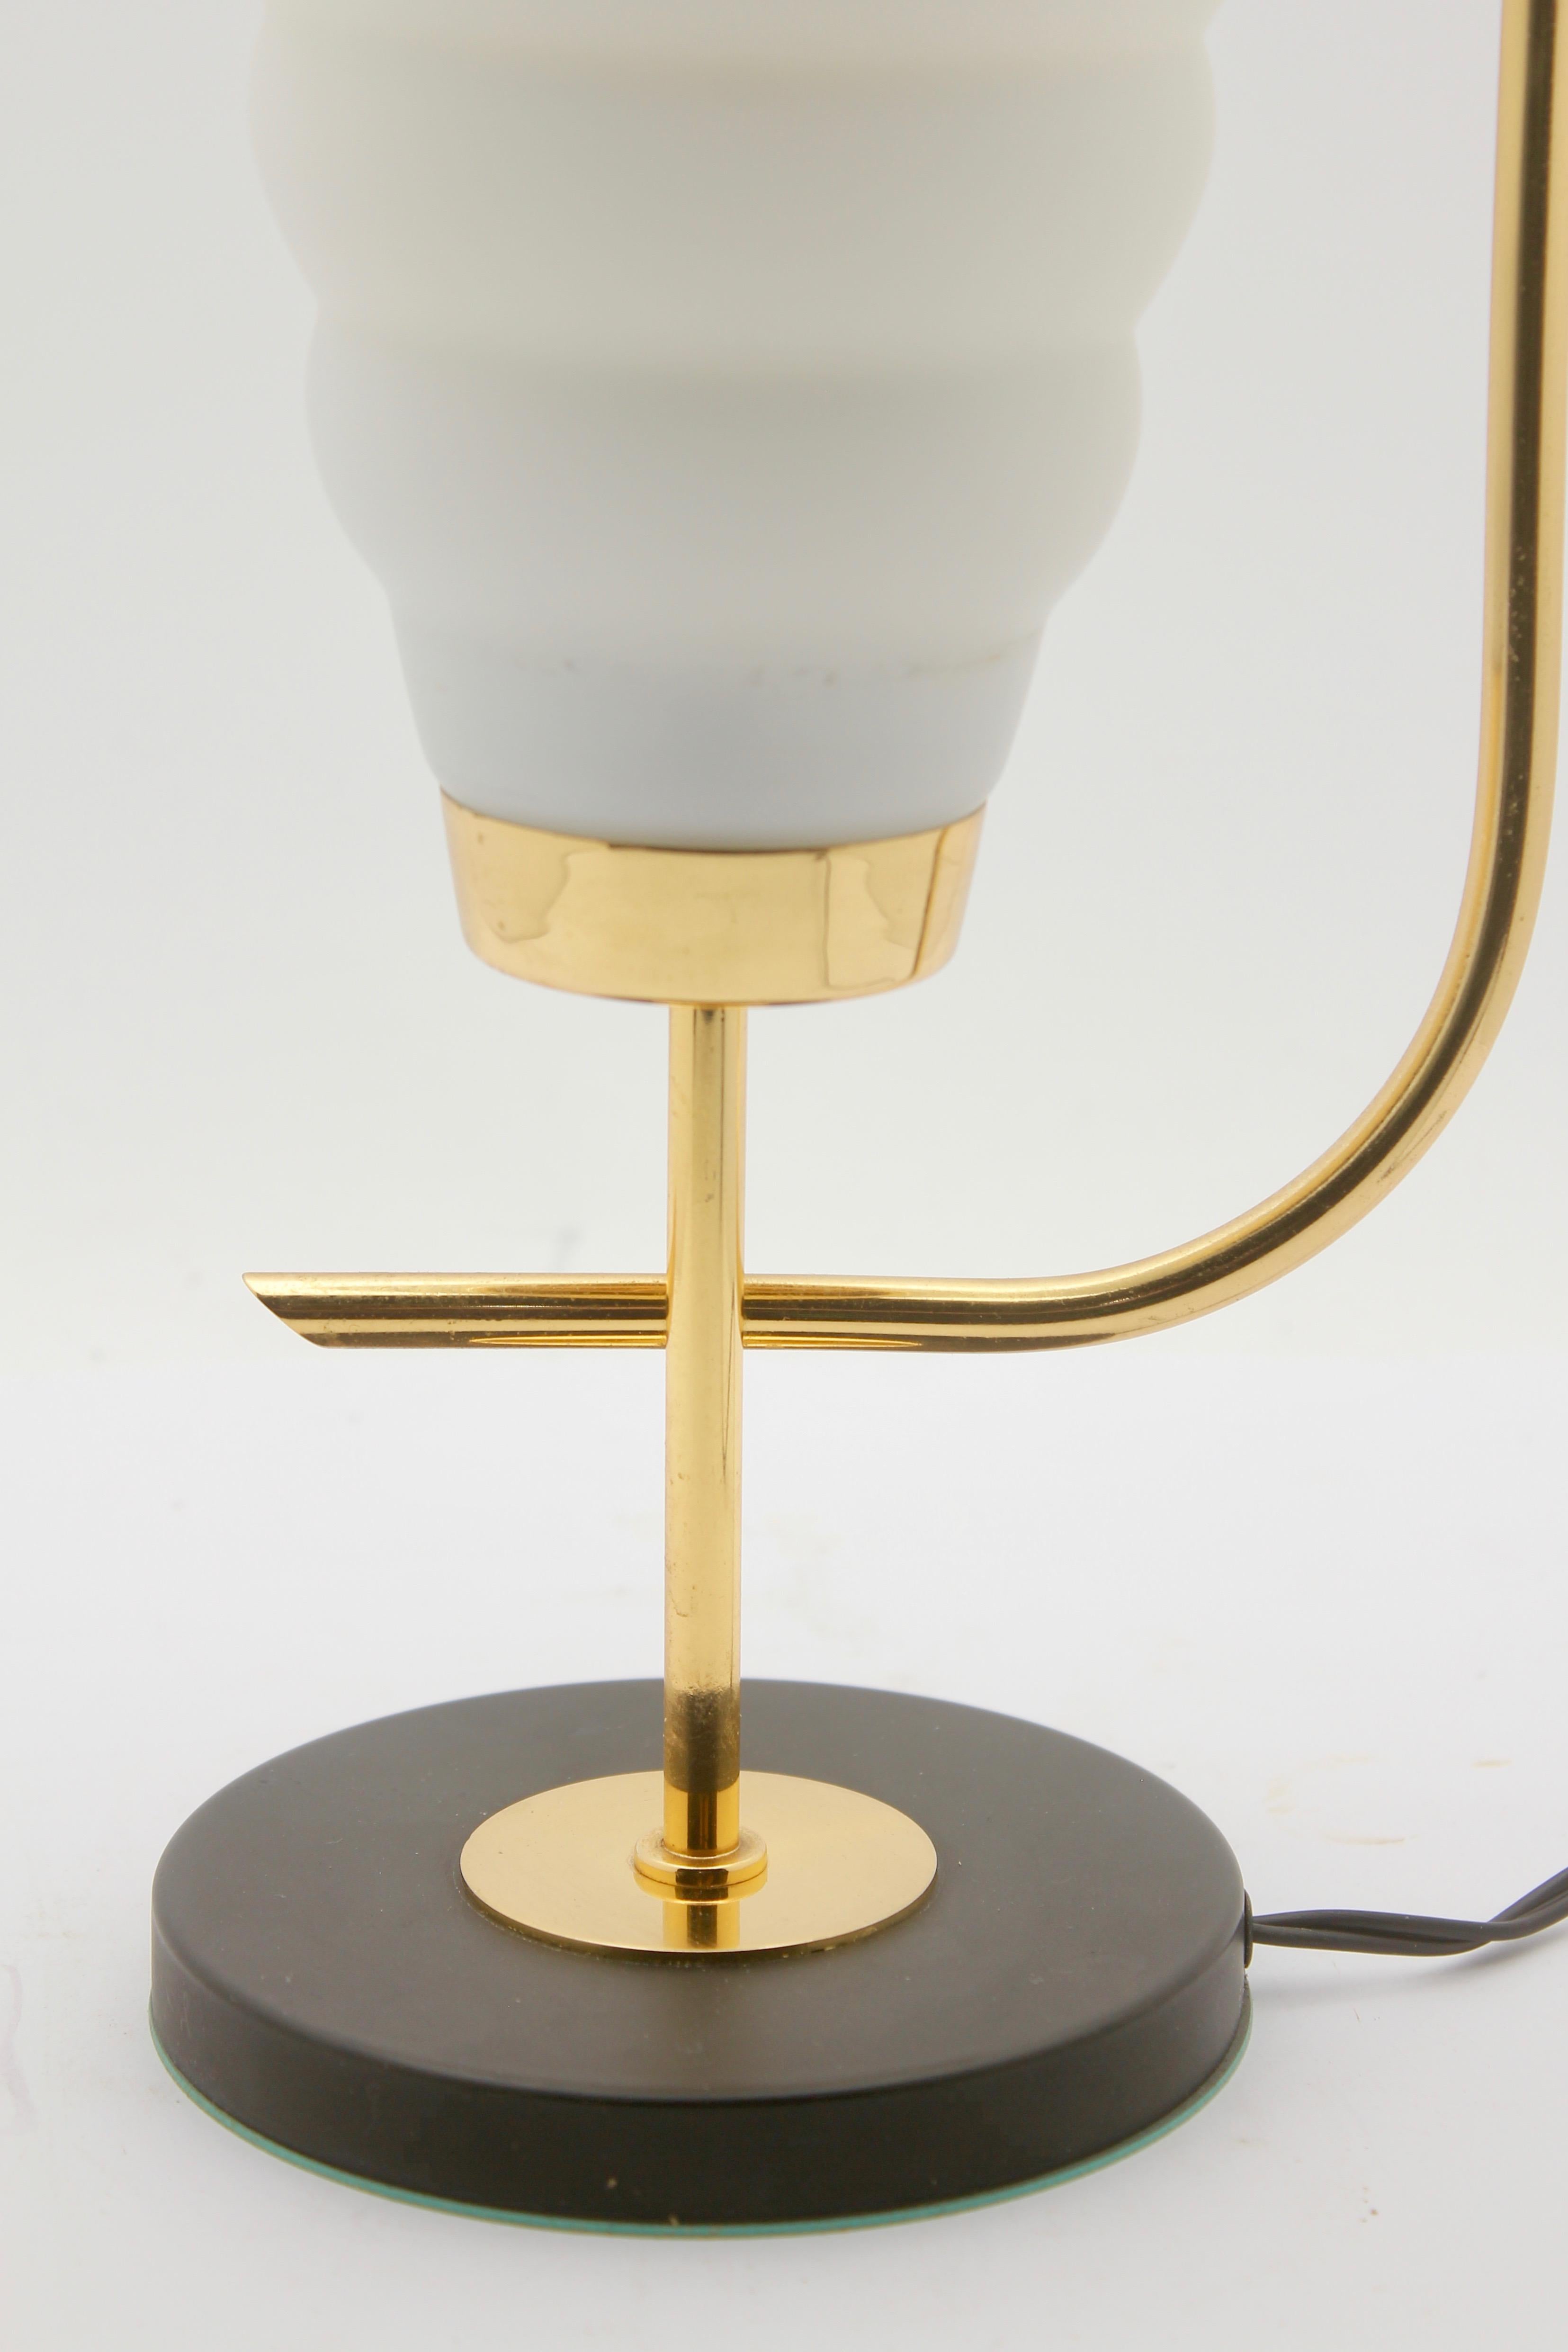 Hand-Crafted Scandinavian Design Table Lamp with Milk-White Glass Shade and Brass Mounts